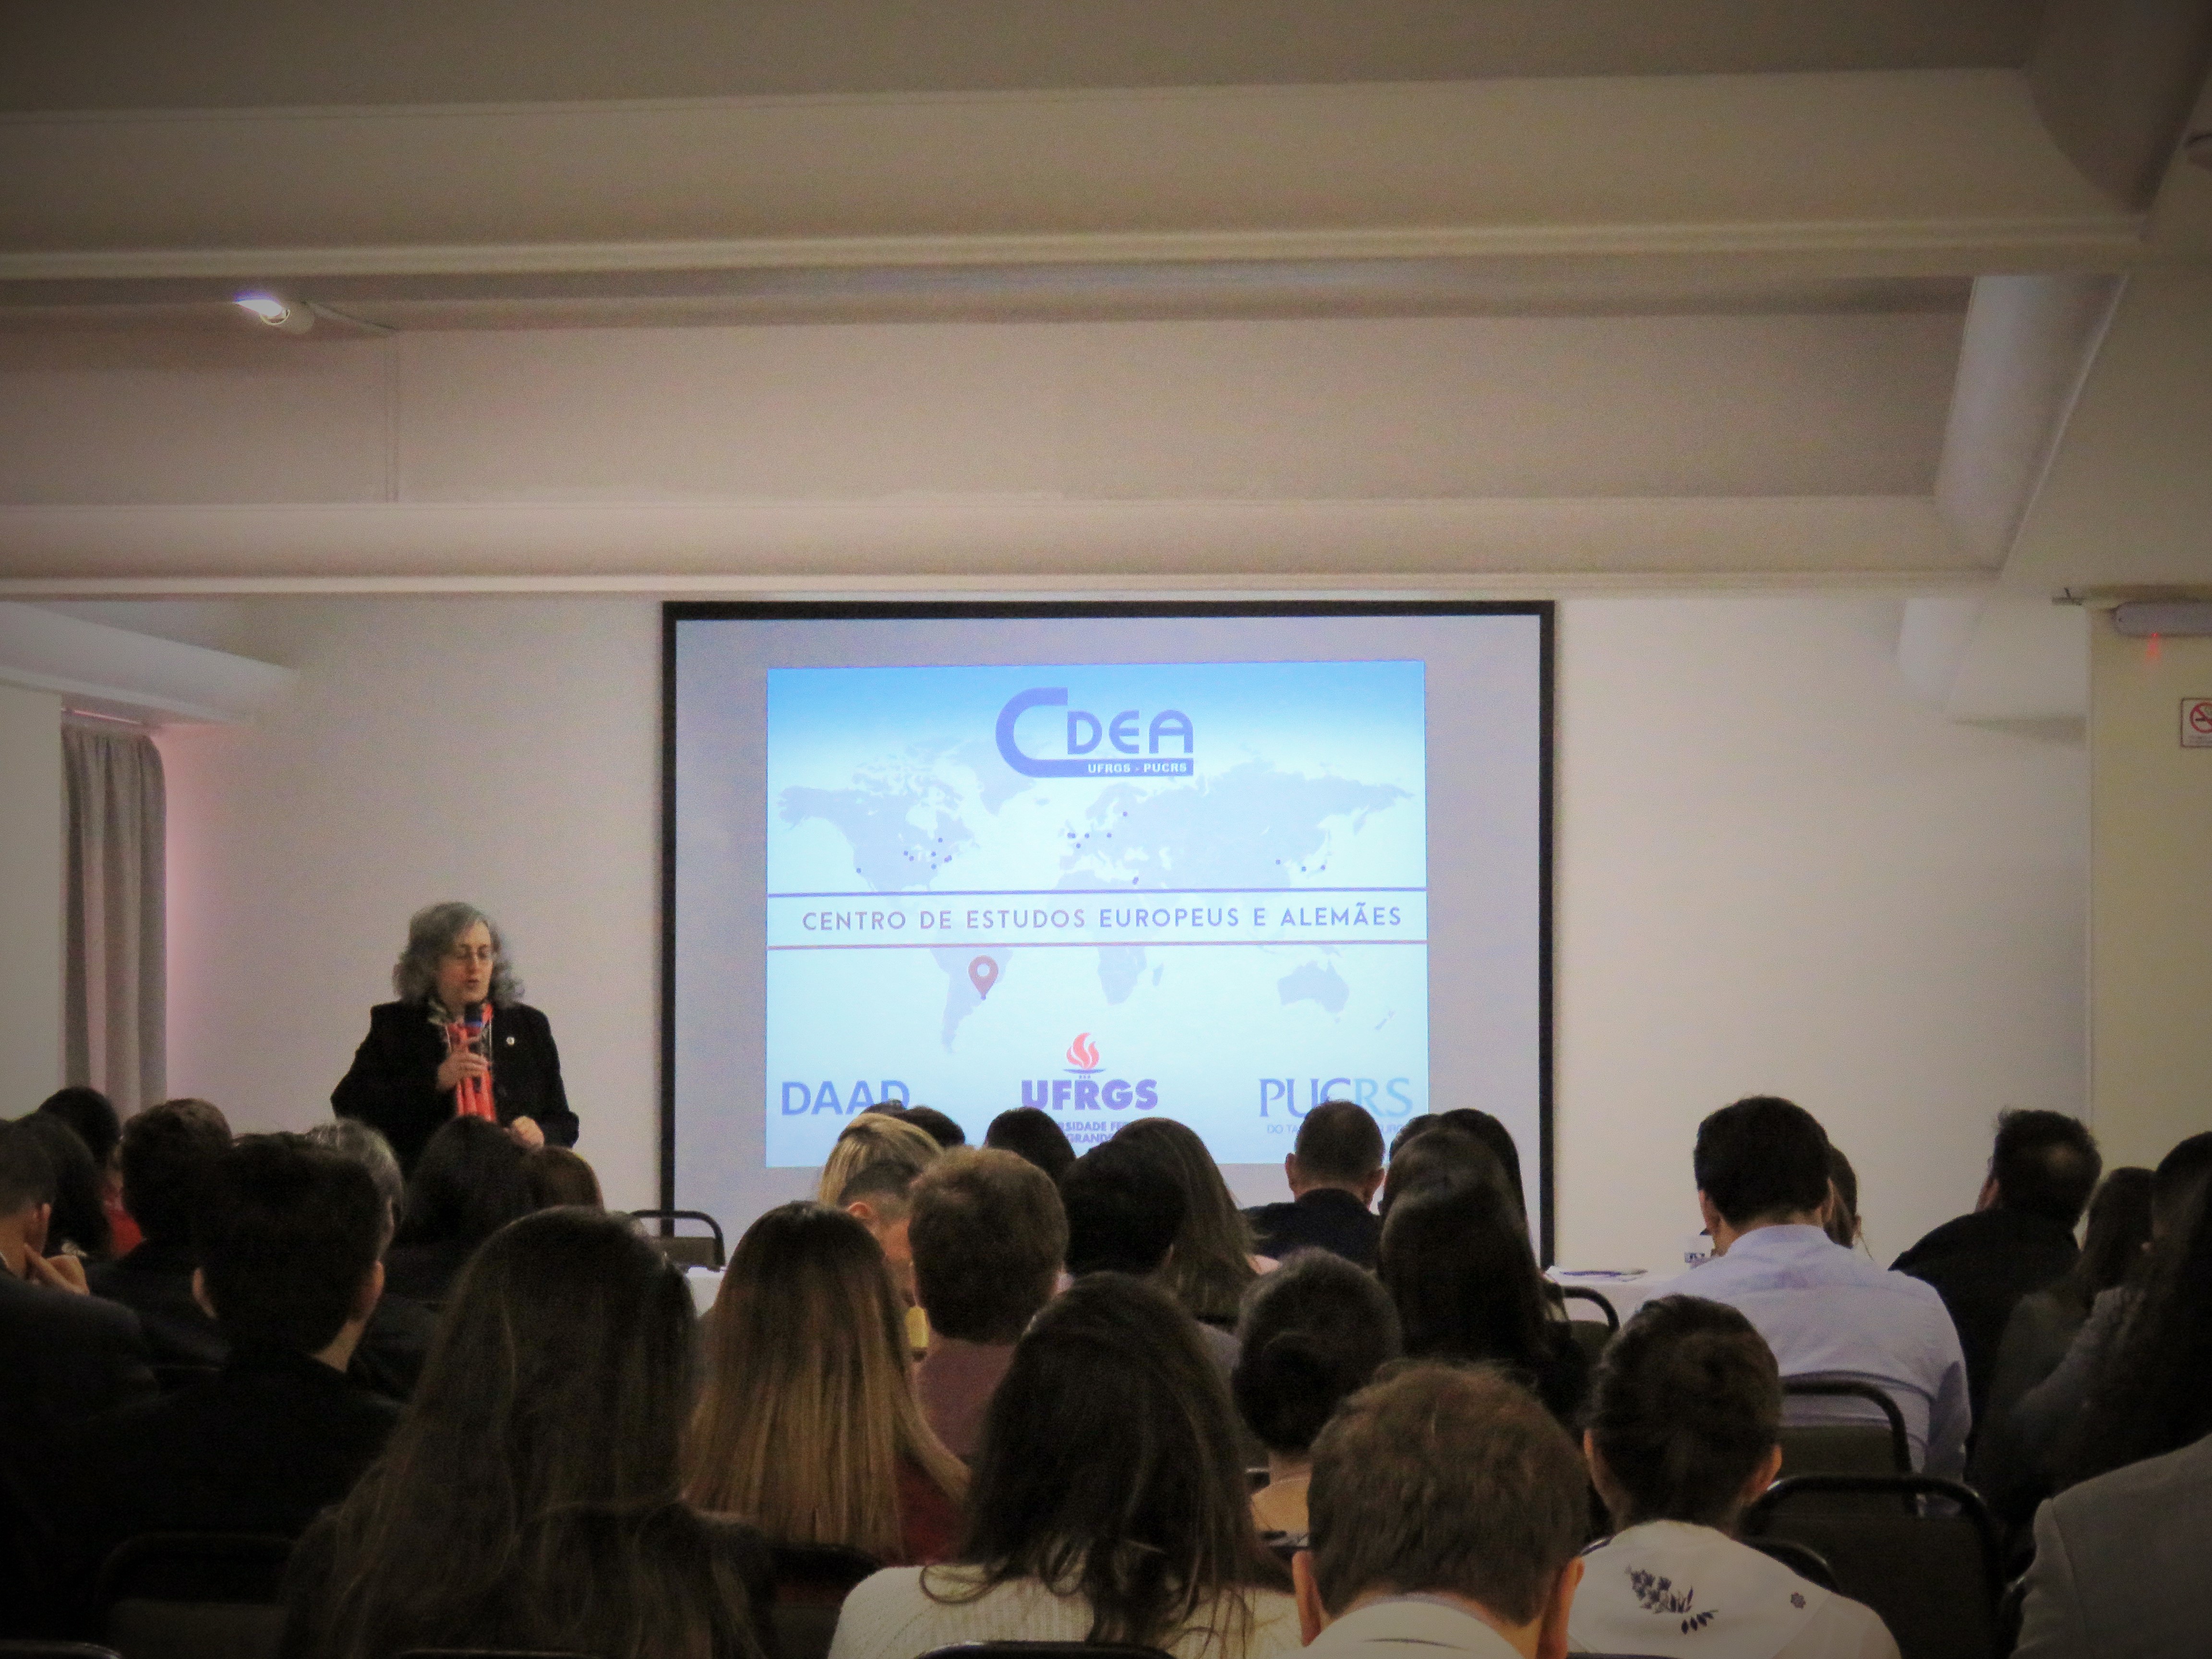 Prof. Claudia Lima Marques presented the recently opened Centre for German and European Studies